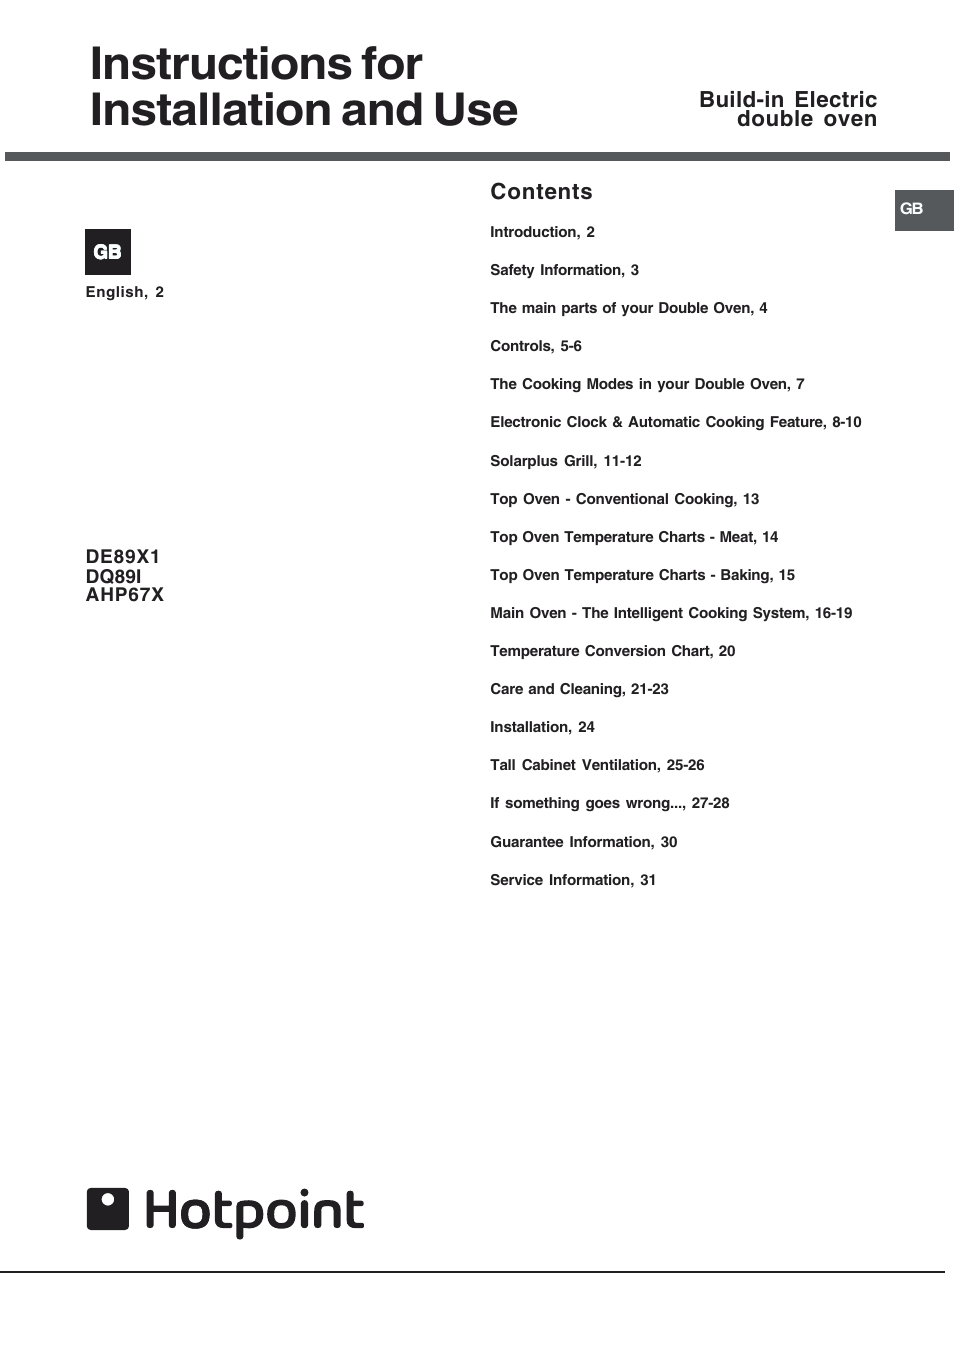 Hotpoint DQ891 User Manual | 32 pages